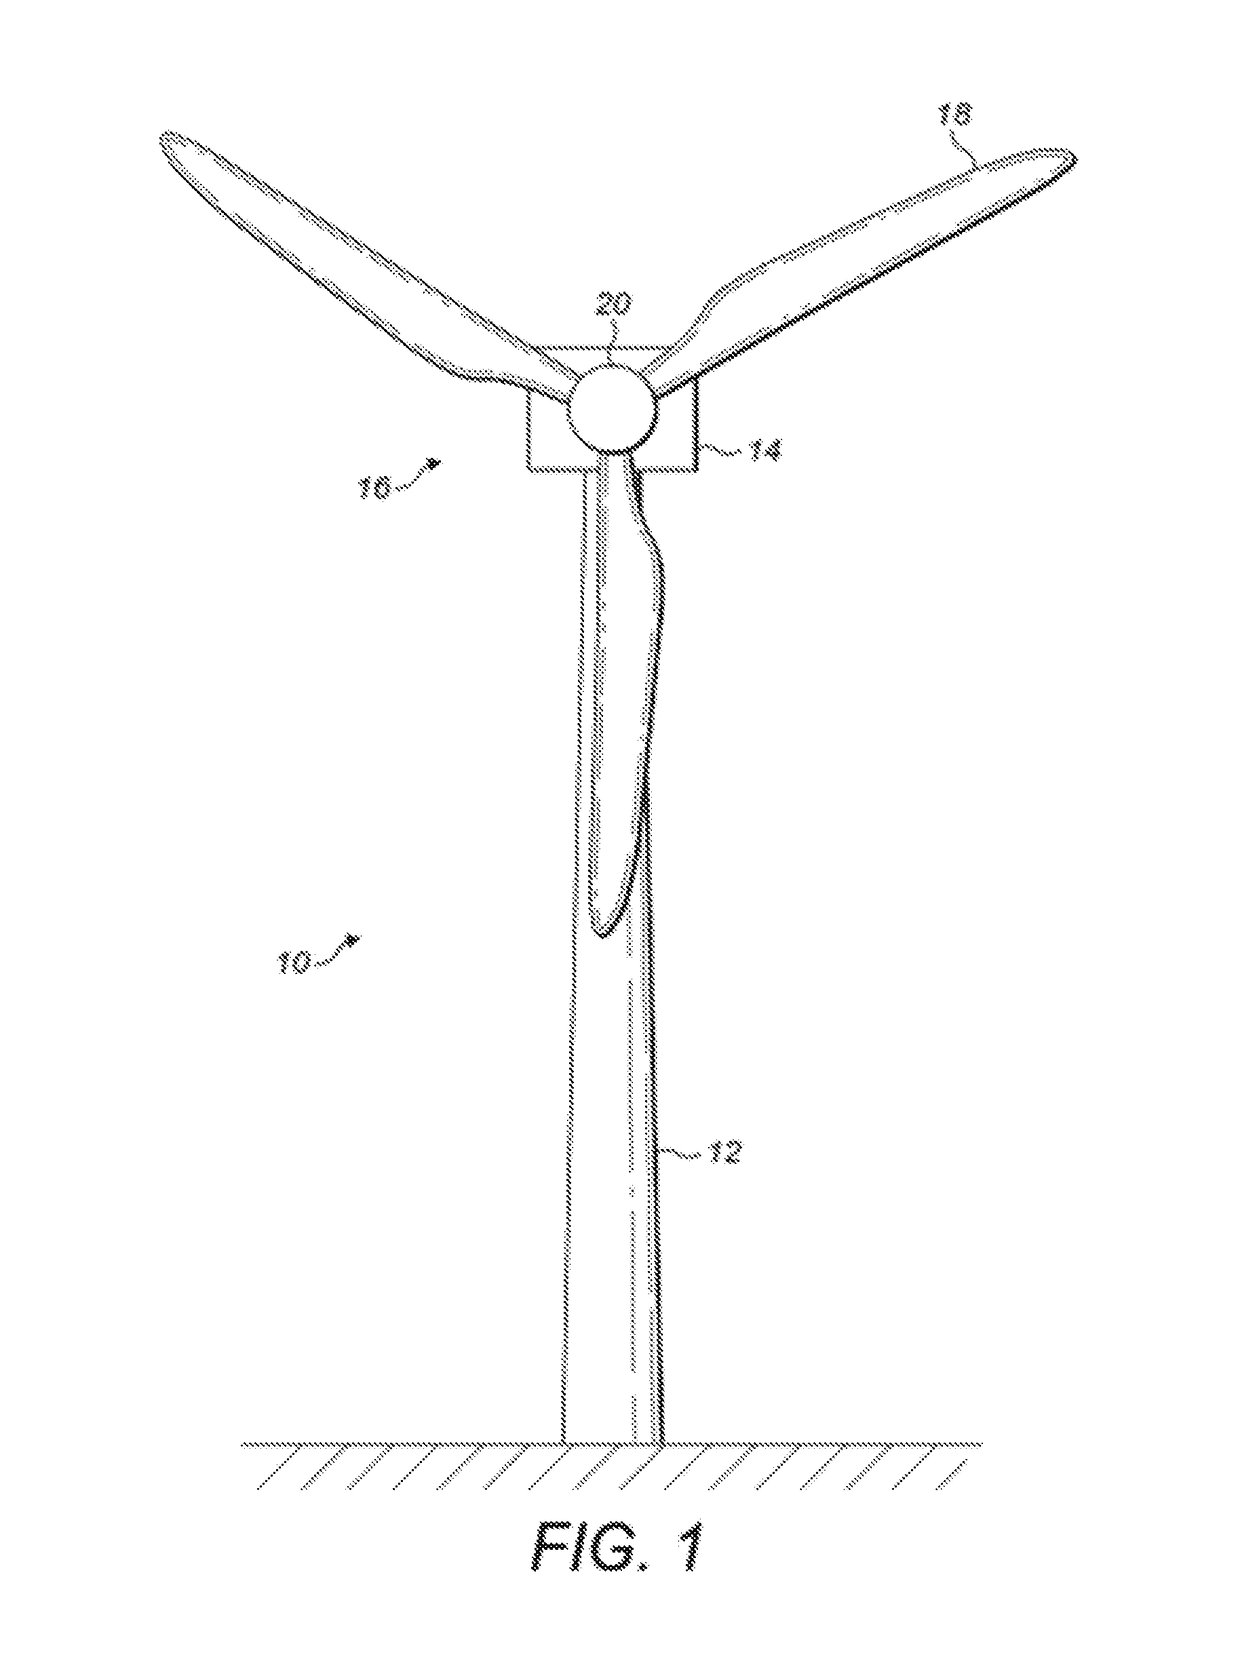 Improvements relating to a yaw sensor for a wind turbine